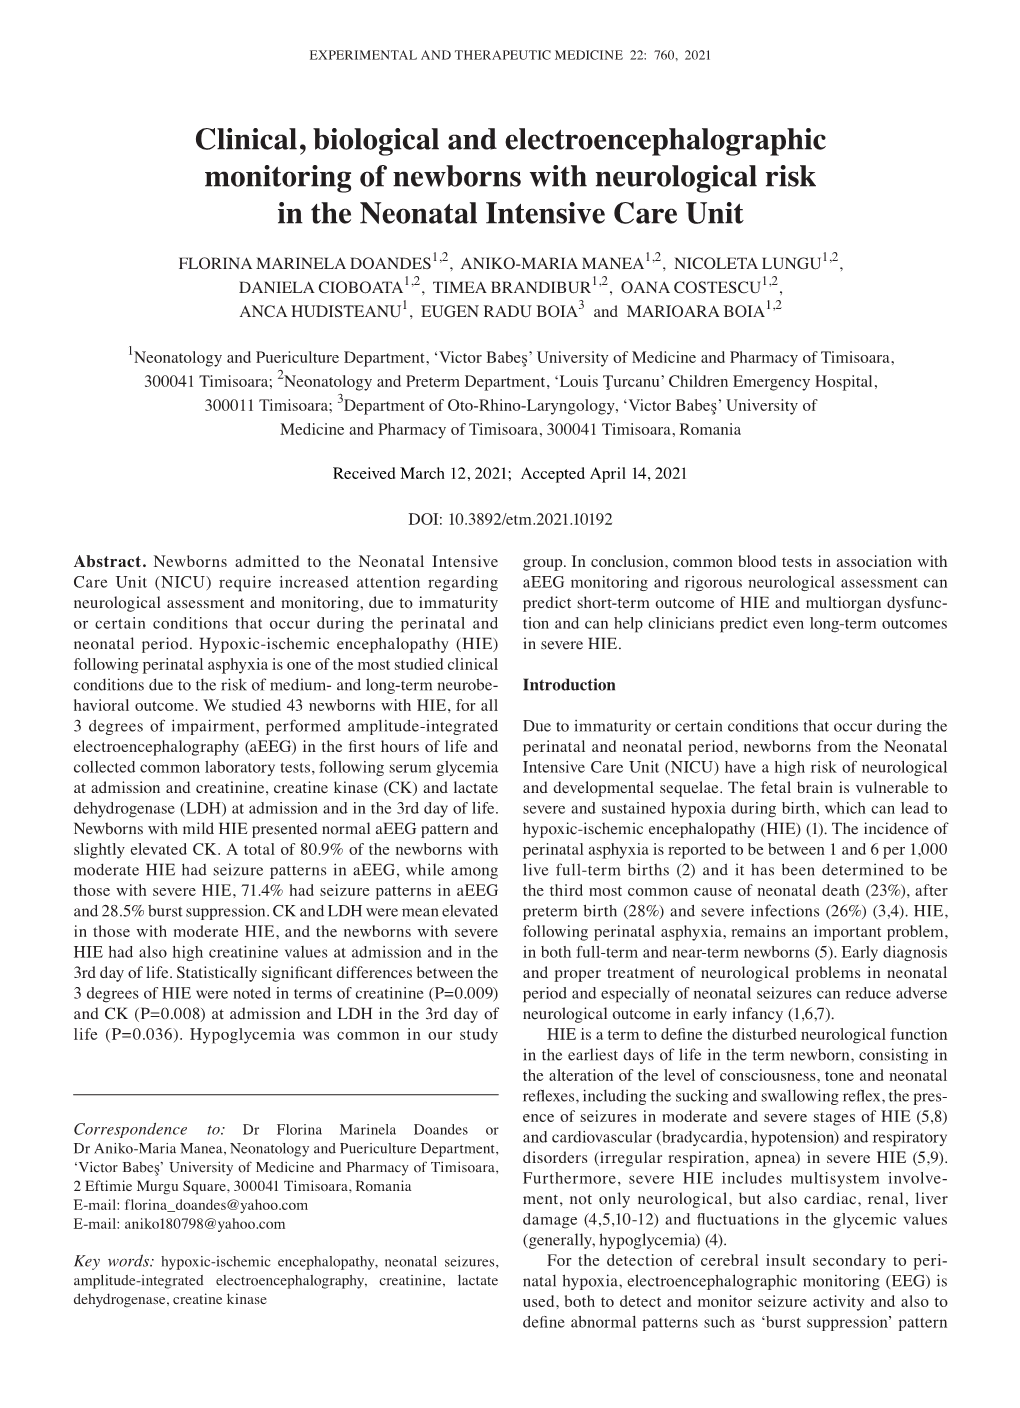 Clinical, Biological and Electroencephalographic Monitoring of Newborns with Neurological Risk in the Neonatal Intensive Care Unit